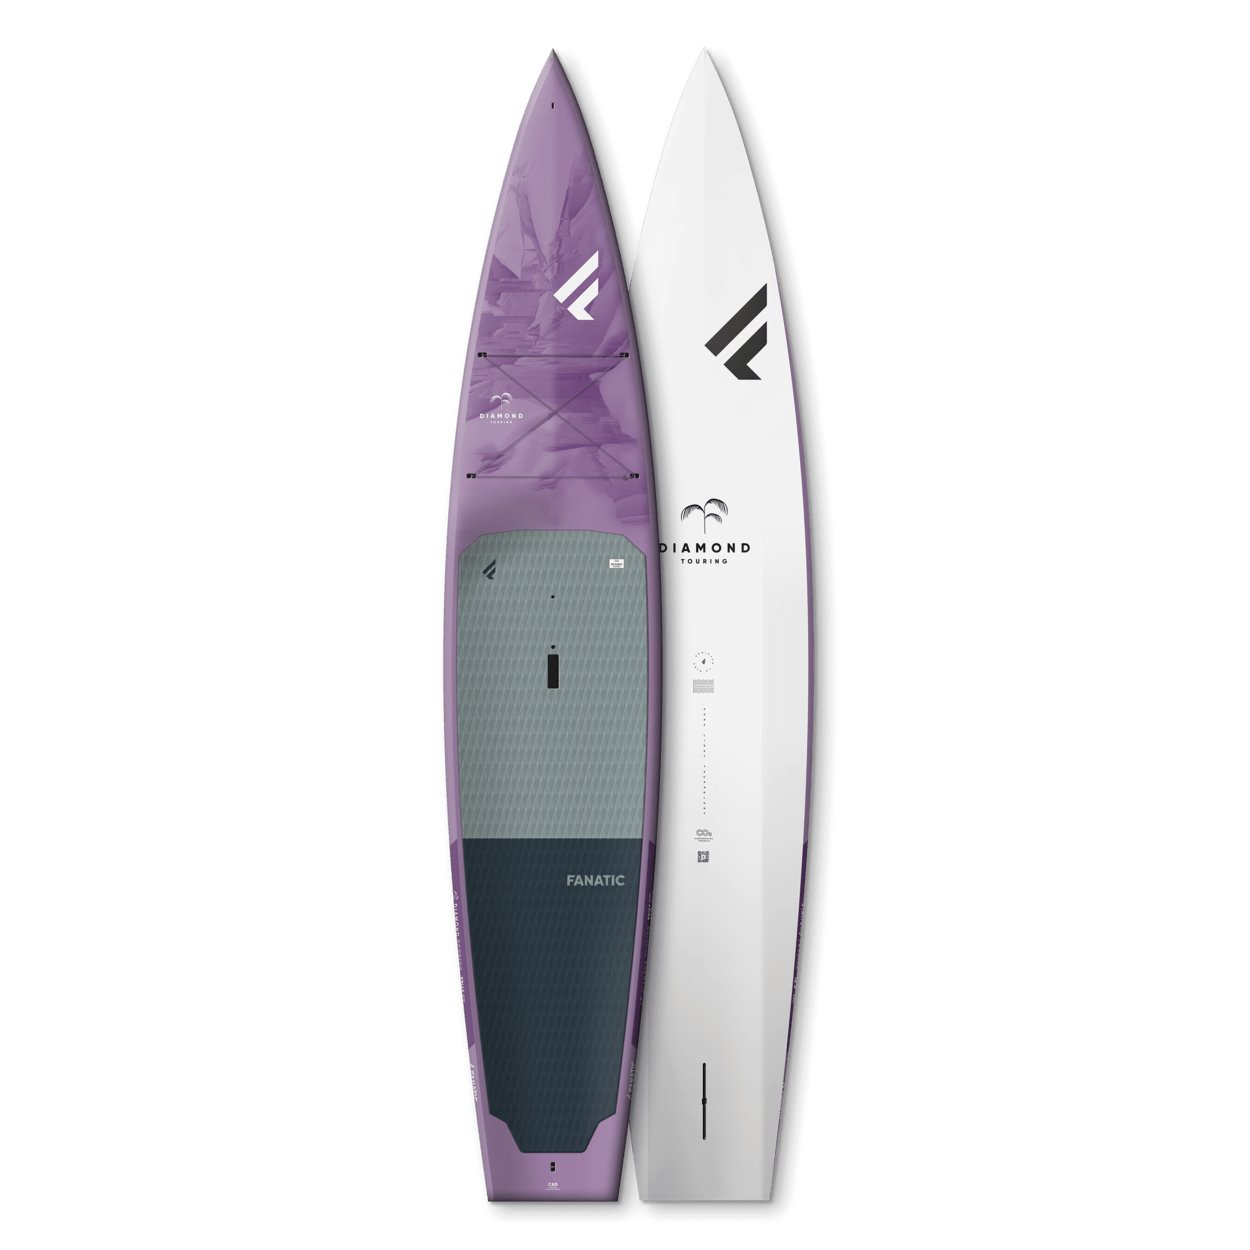 Fanatic Diamond Touring 2024 - Worthing Watersports - 9010583133850 - SUP Composite - Fanatic SUP